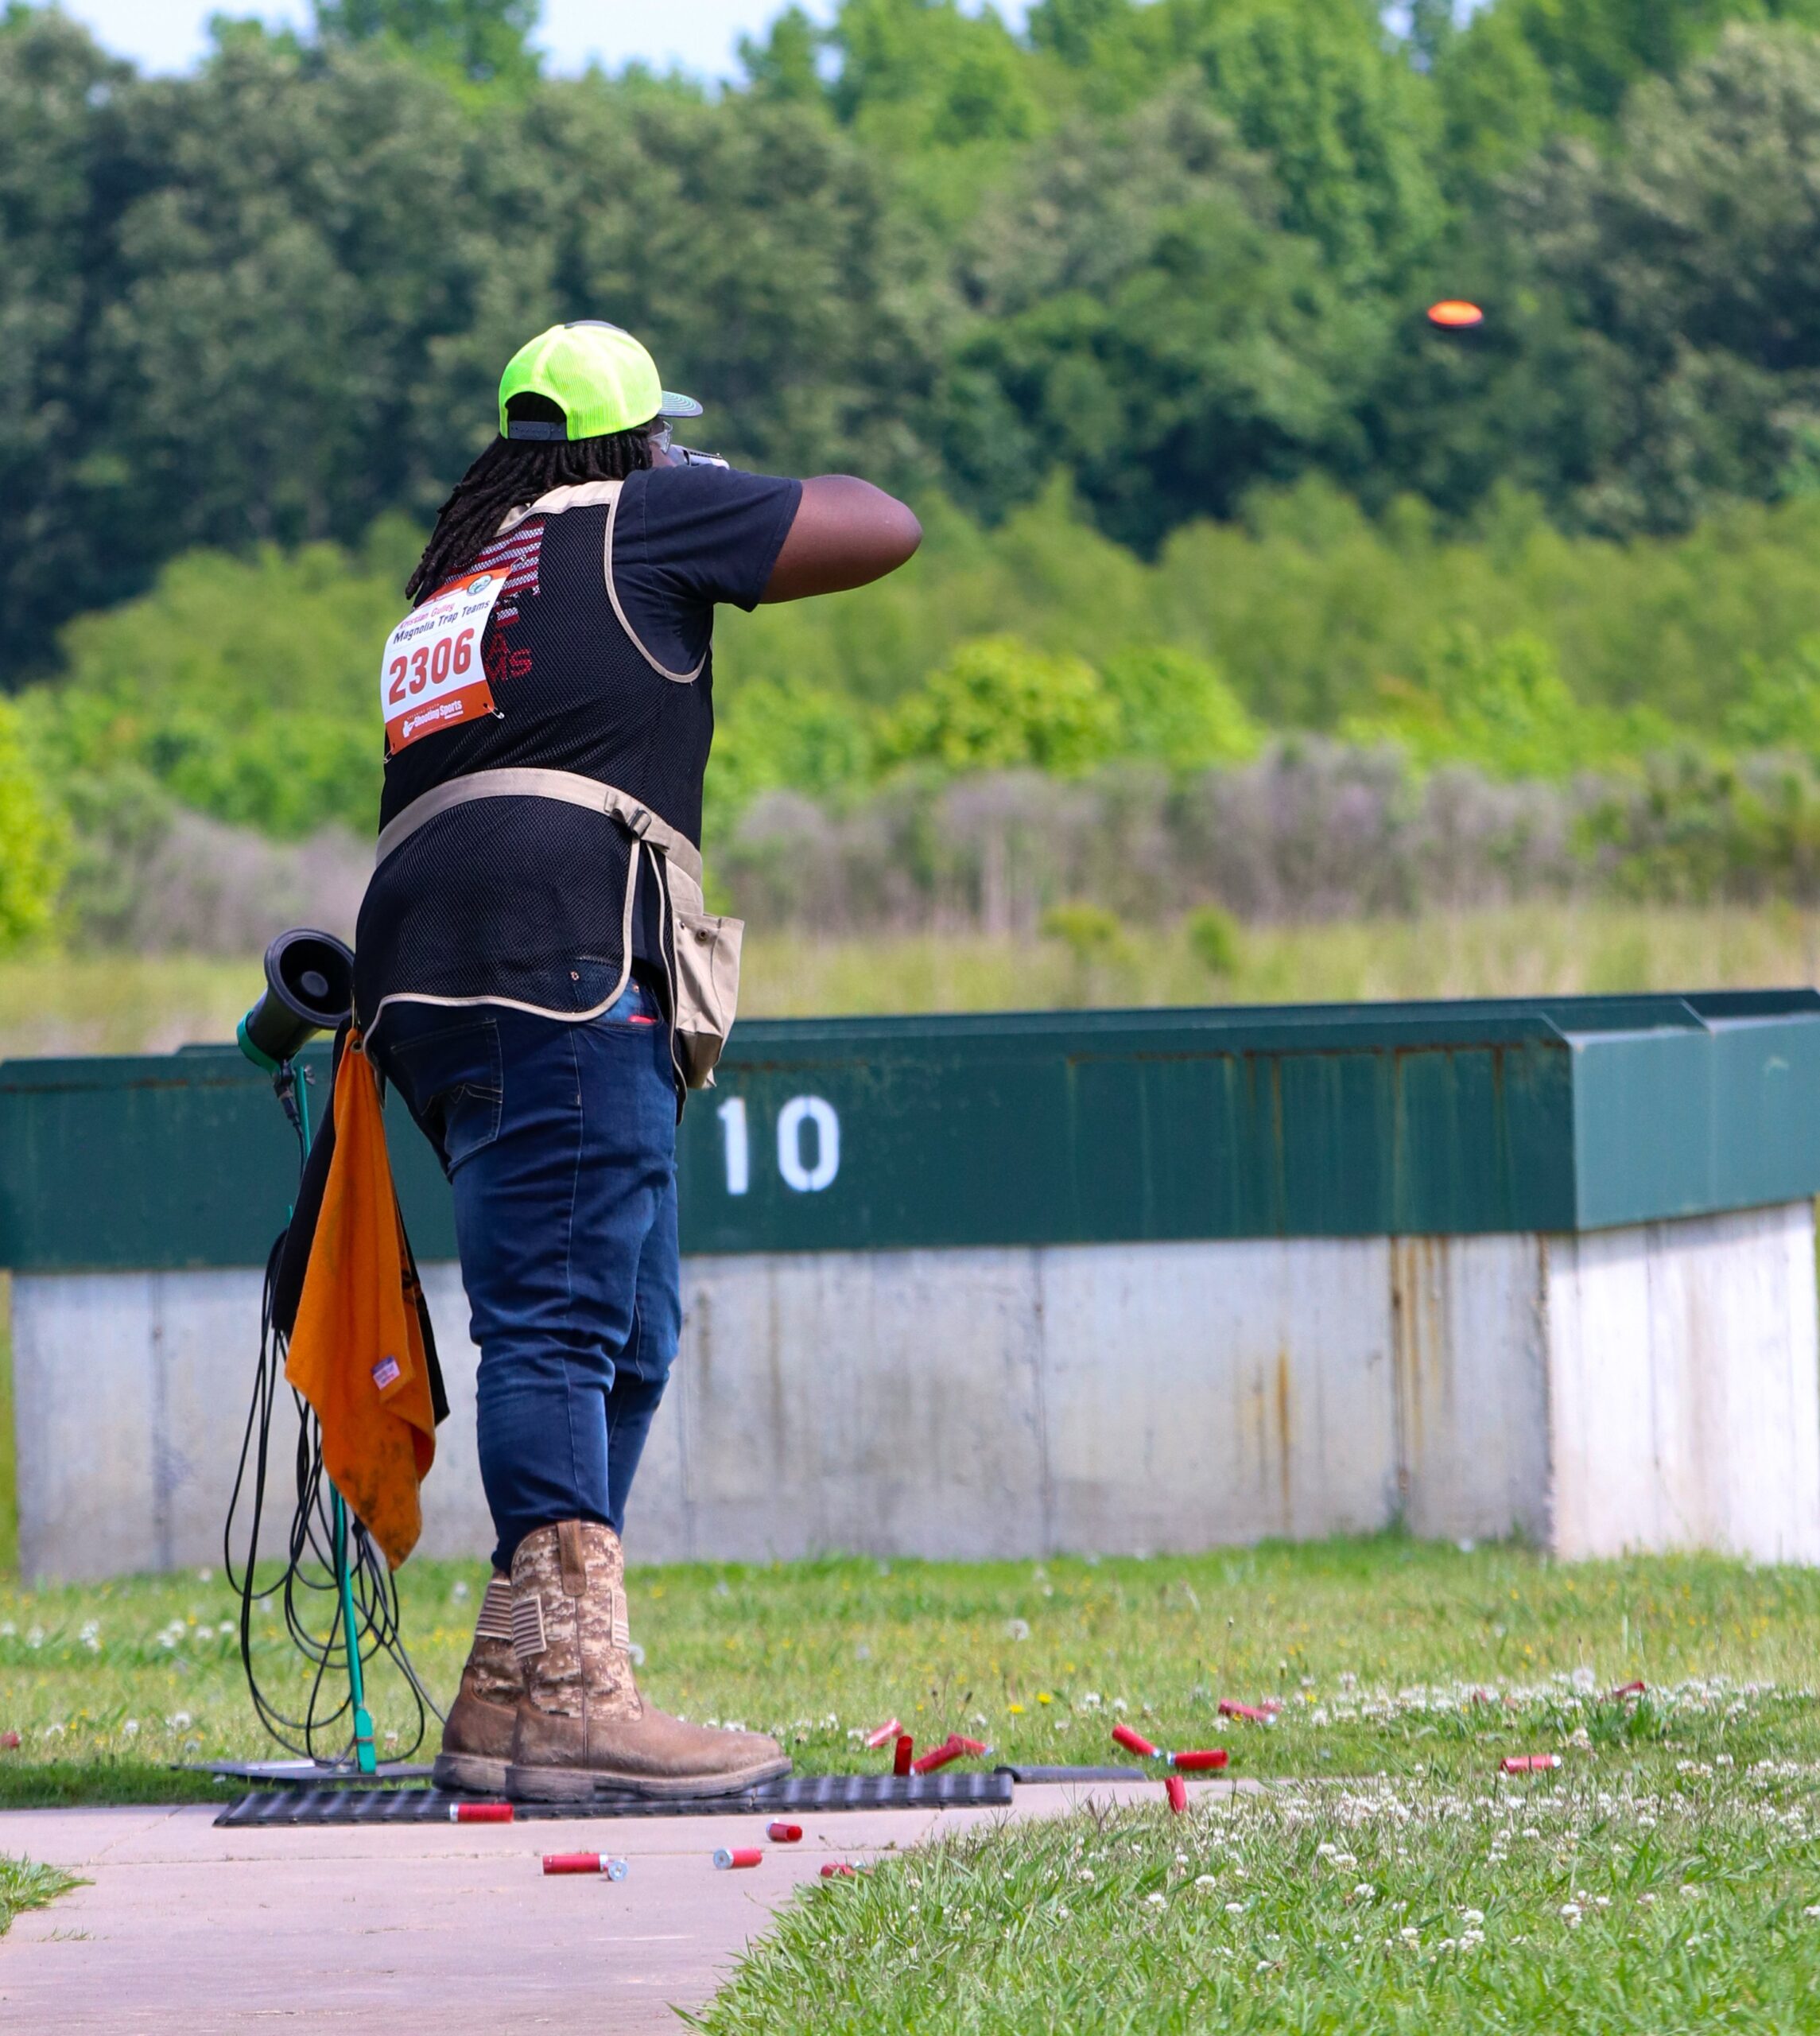 Trap shooting Thanks to wildlife fines being redirected toward conservation education, many schools and organizations have expanded their shooting sports program to compete in competitive trap shooting.